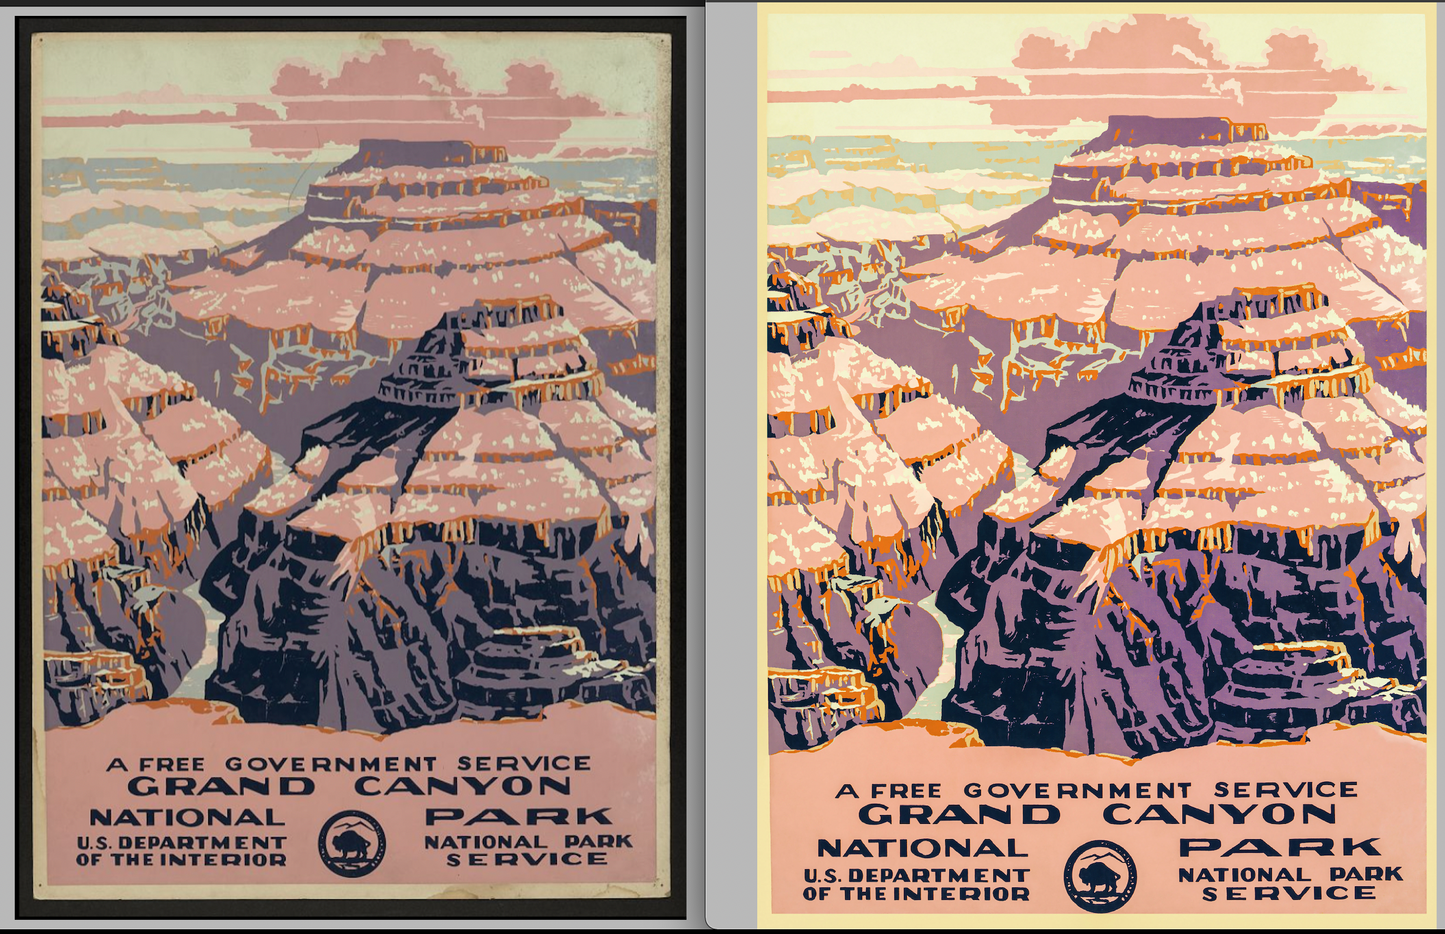 Vintage USA WPA Travel Posters [47 Images]